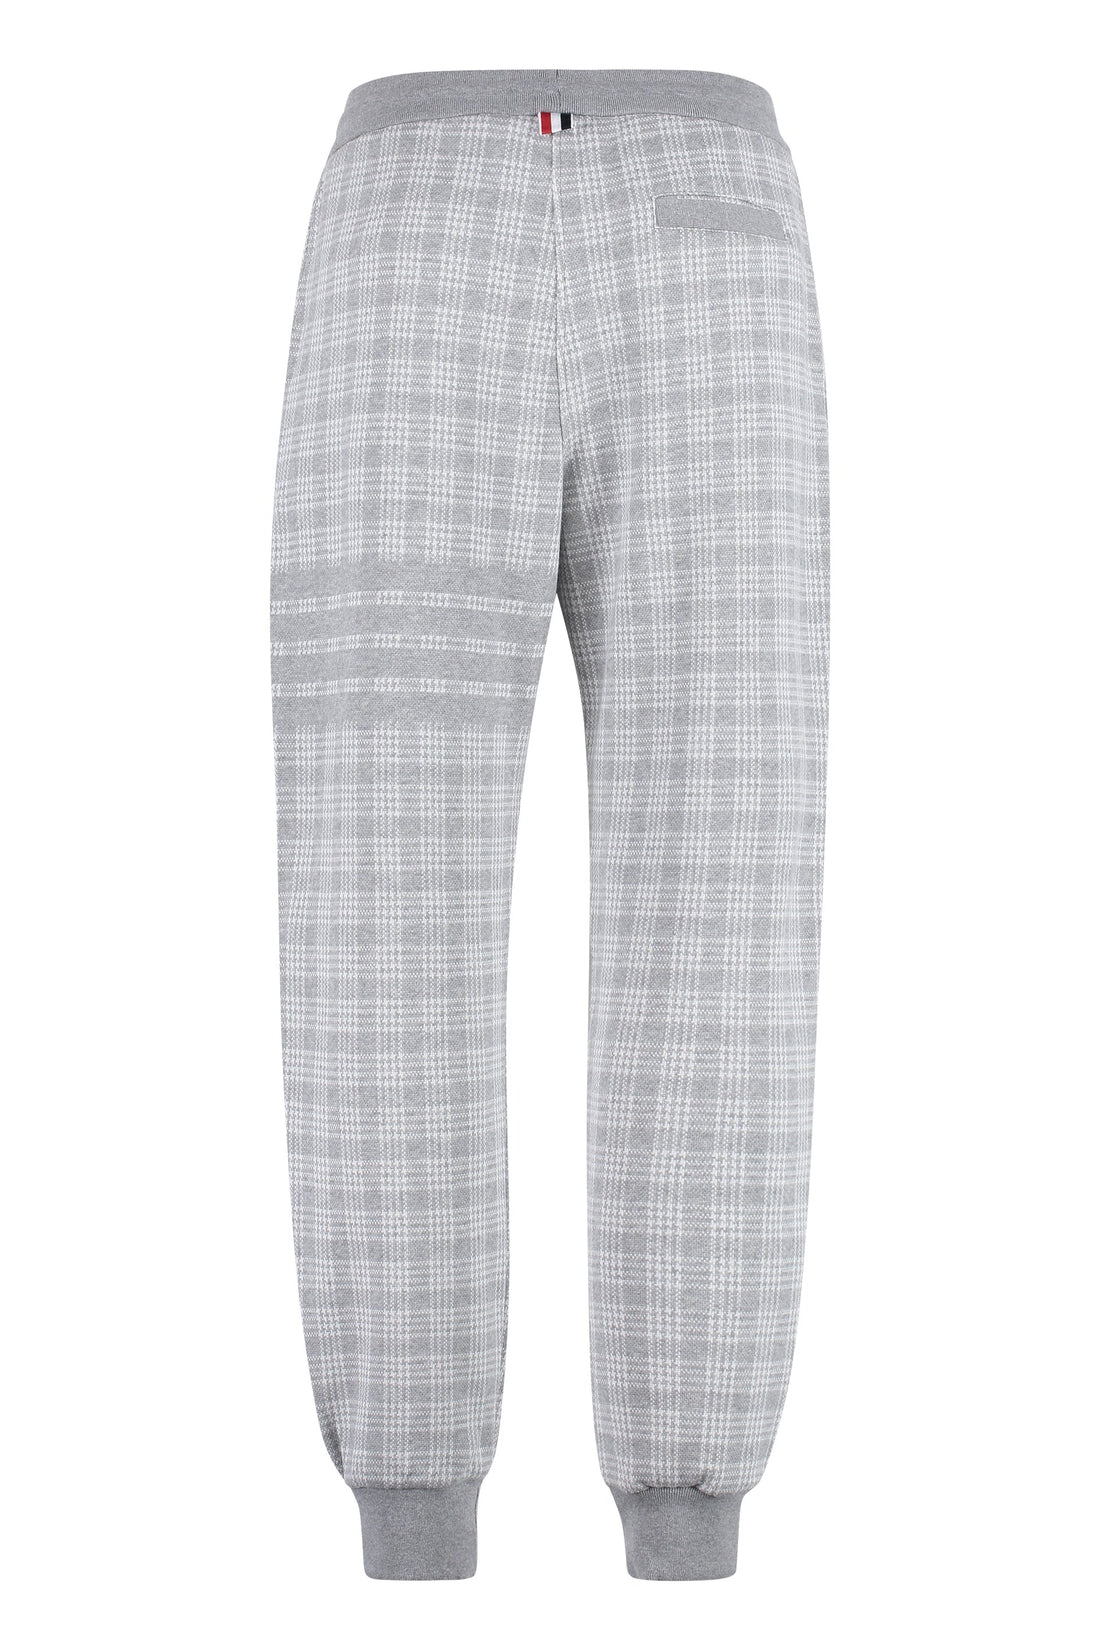 Thom Browne-OUTLET-SALE-Checked cotton track-pants-ARCHIVIST